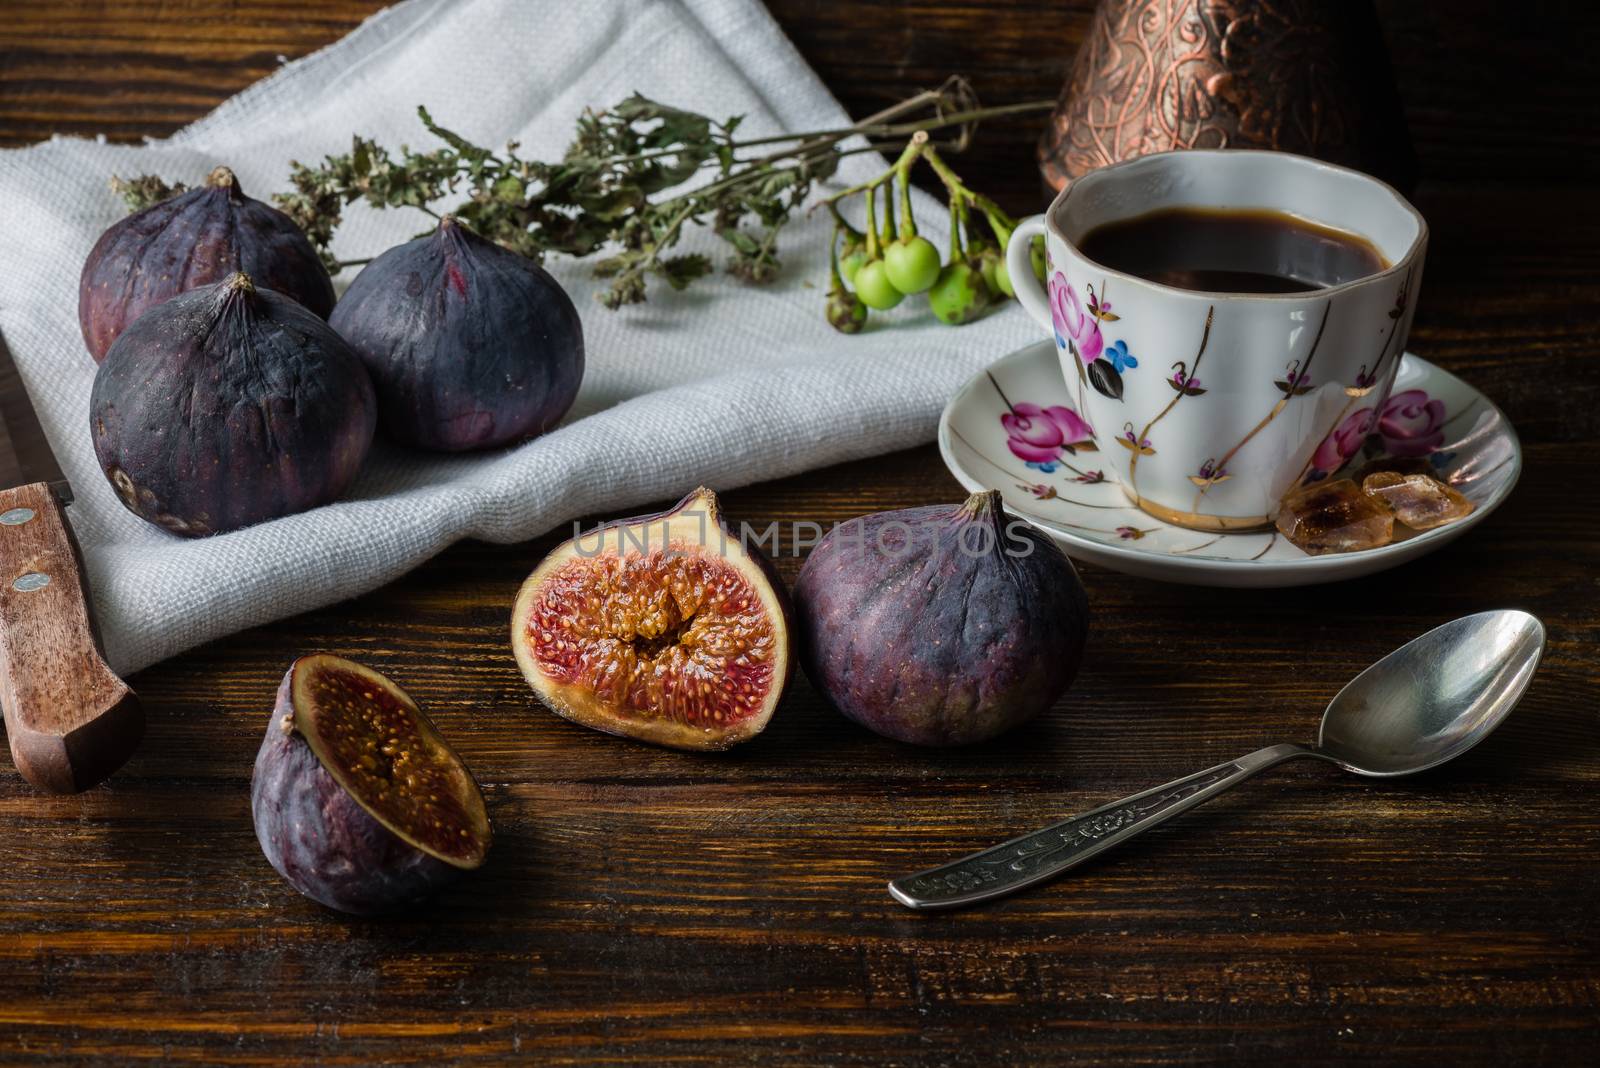 Cup of coffee with juicy figs for dessert by Seva_blsv